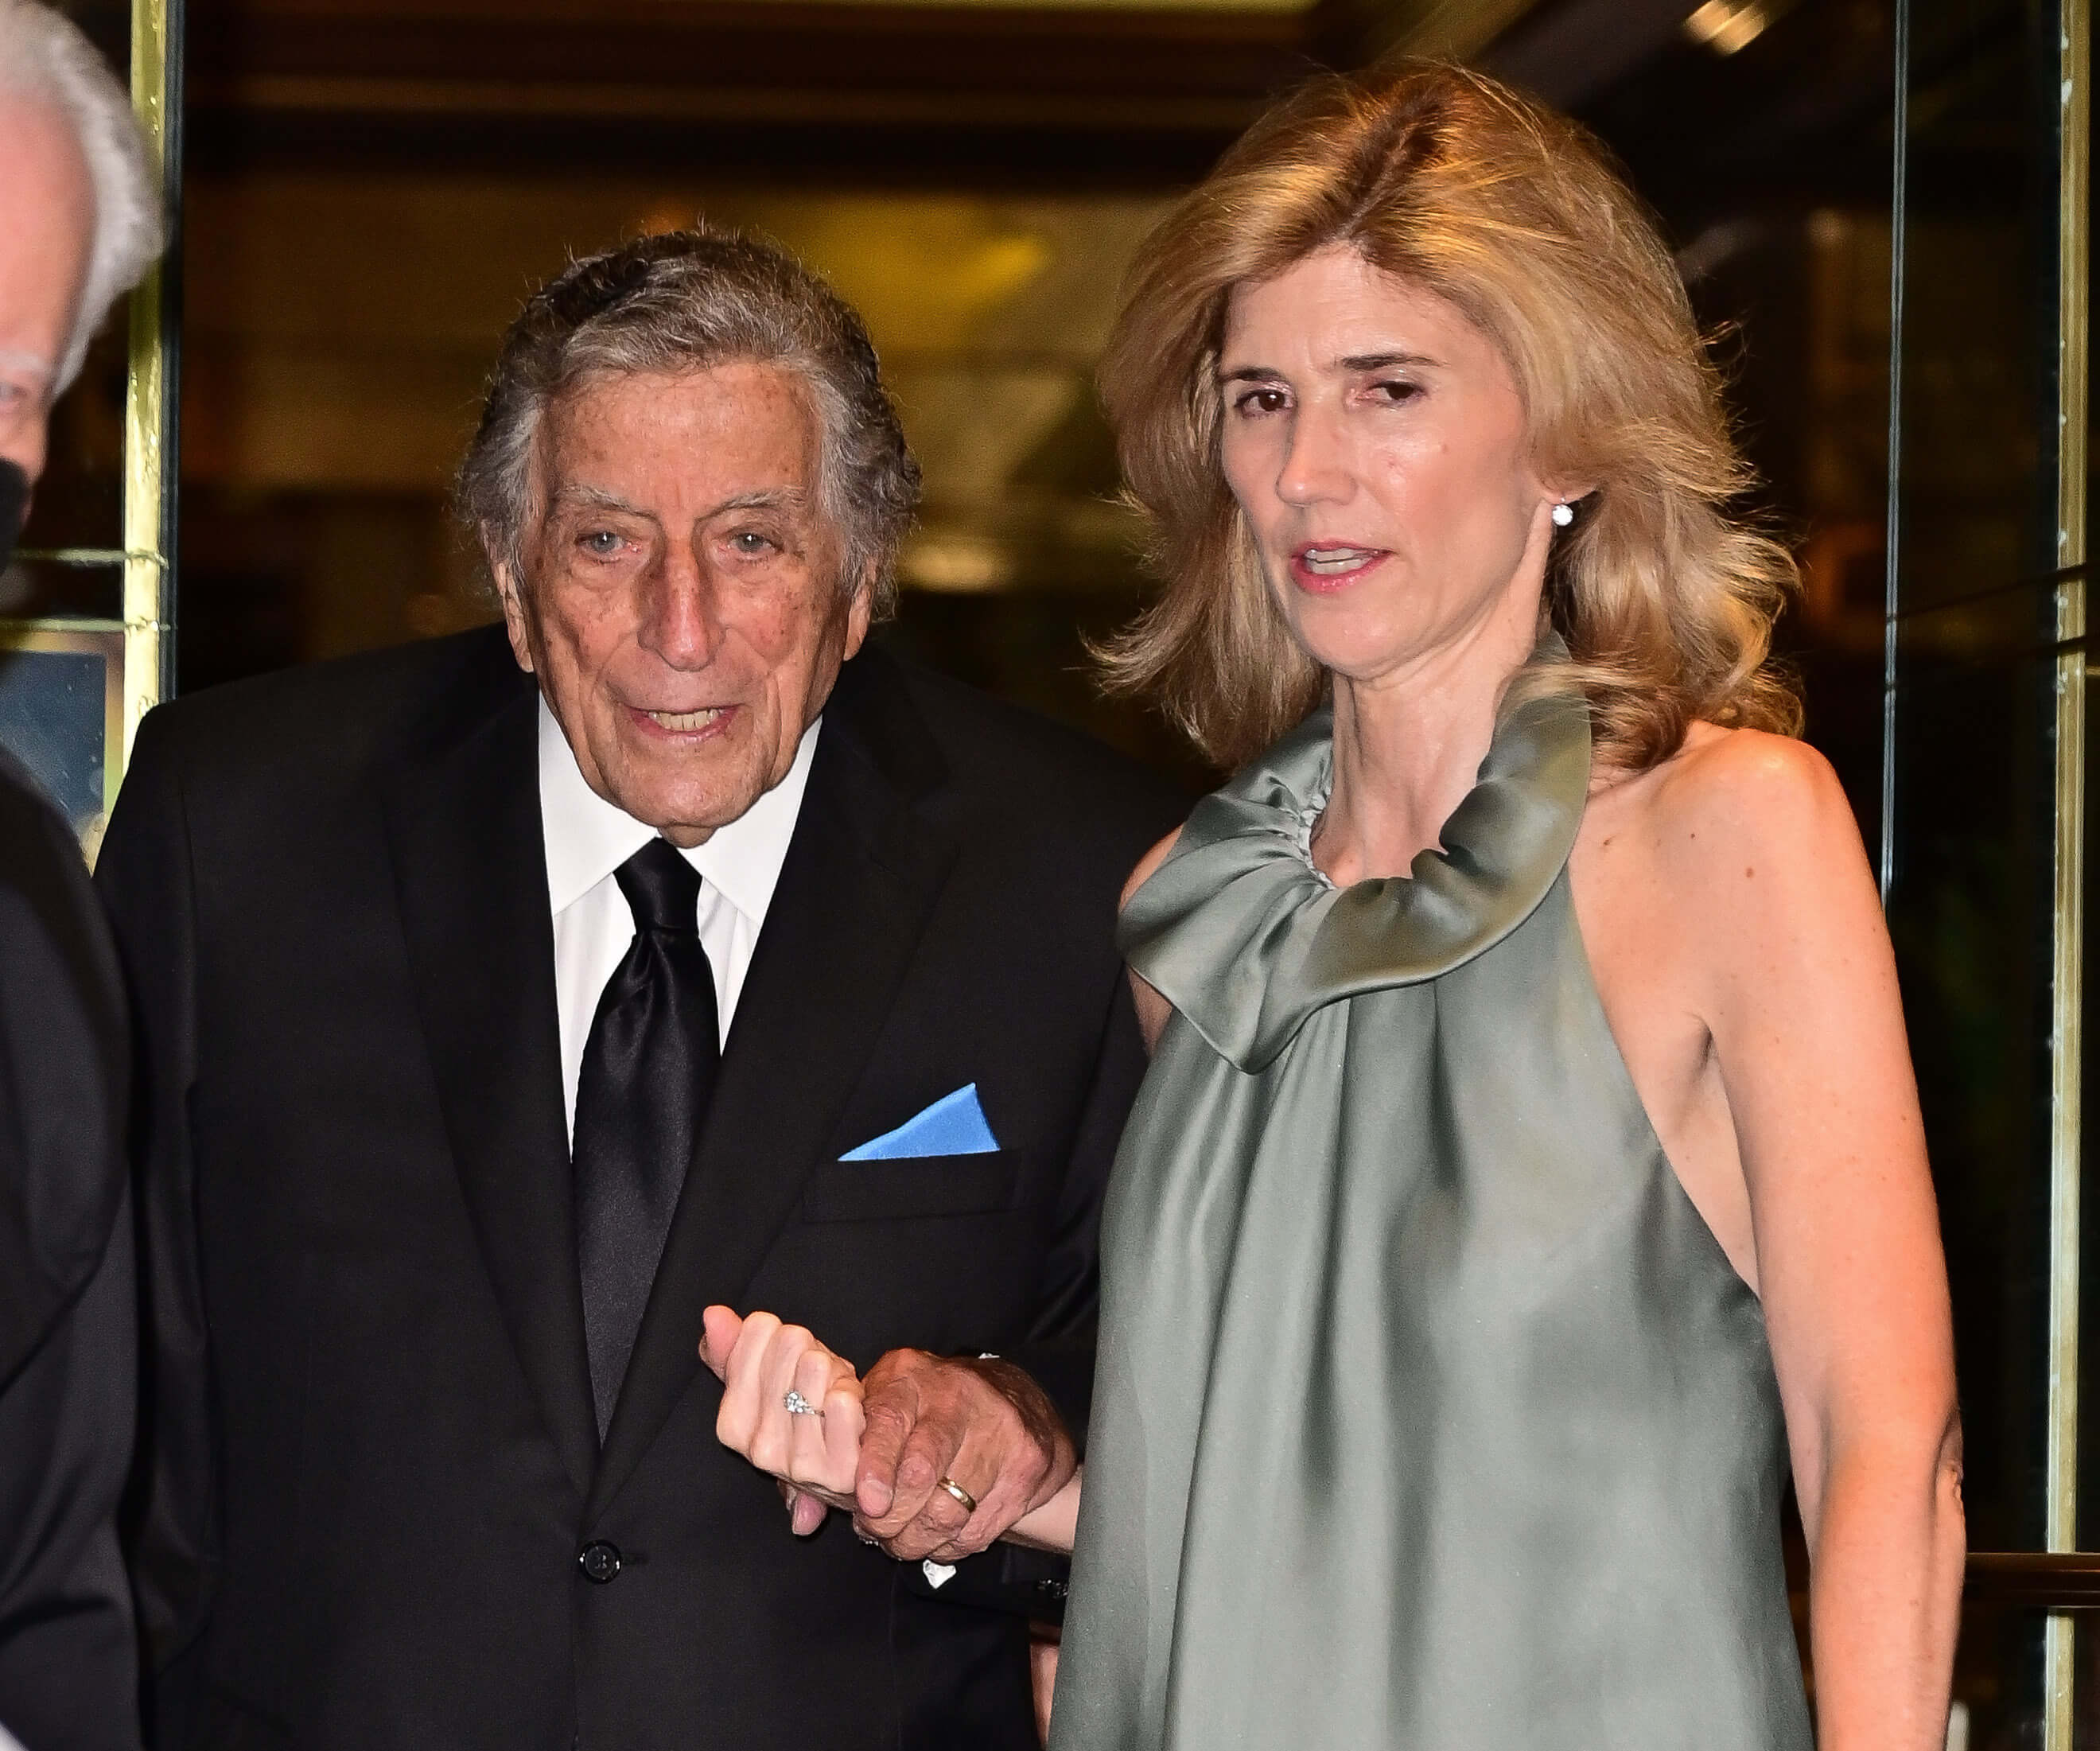 Tony Bennett and his wife, Susan Benedetto, walking together